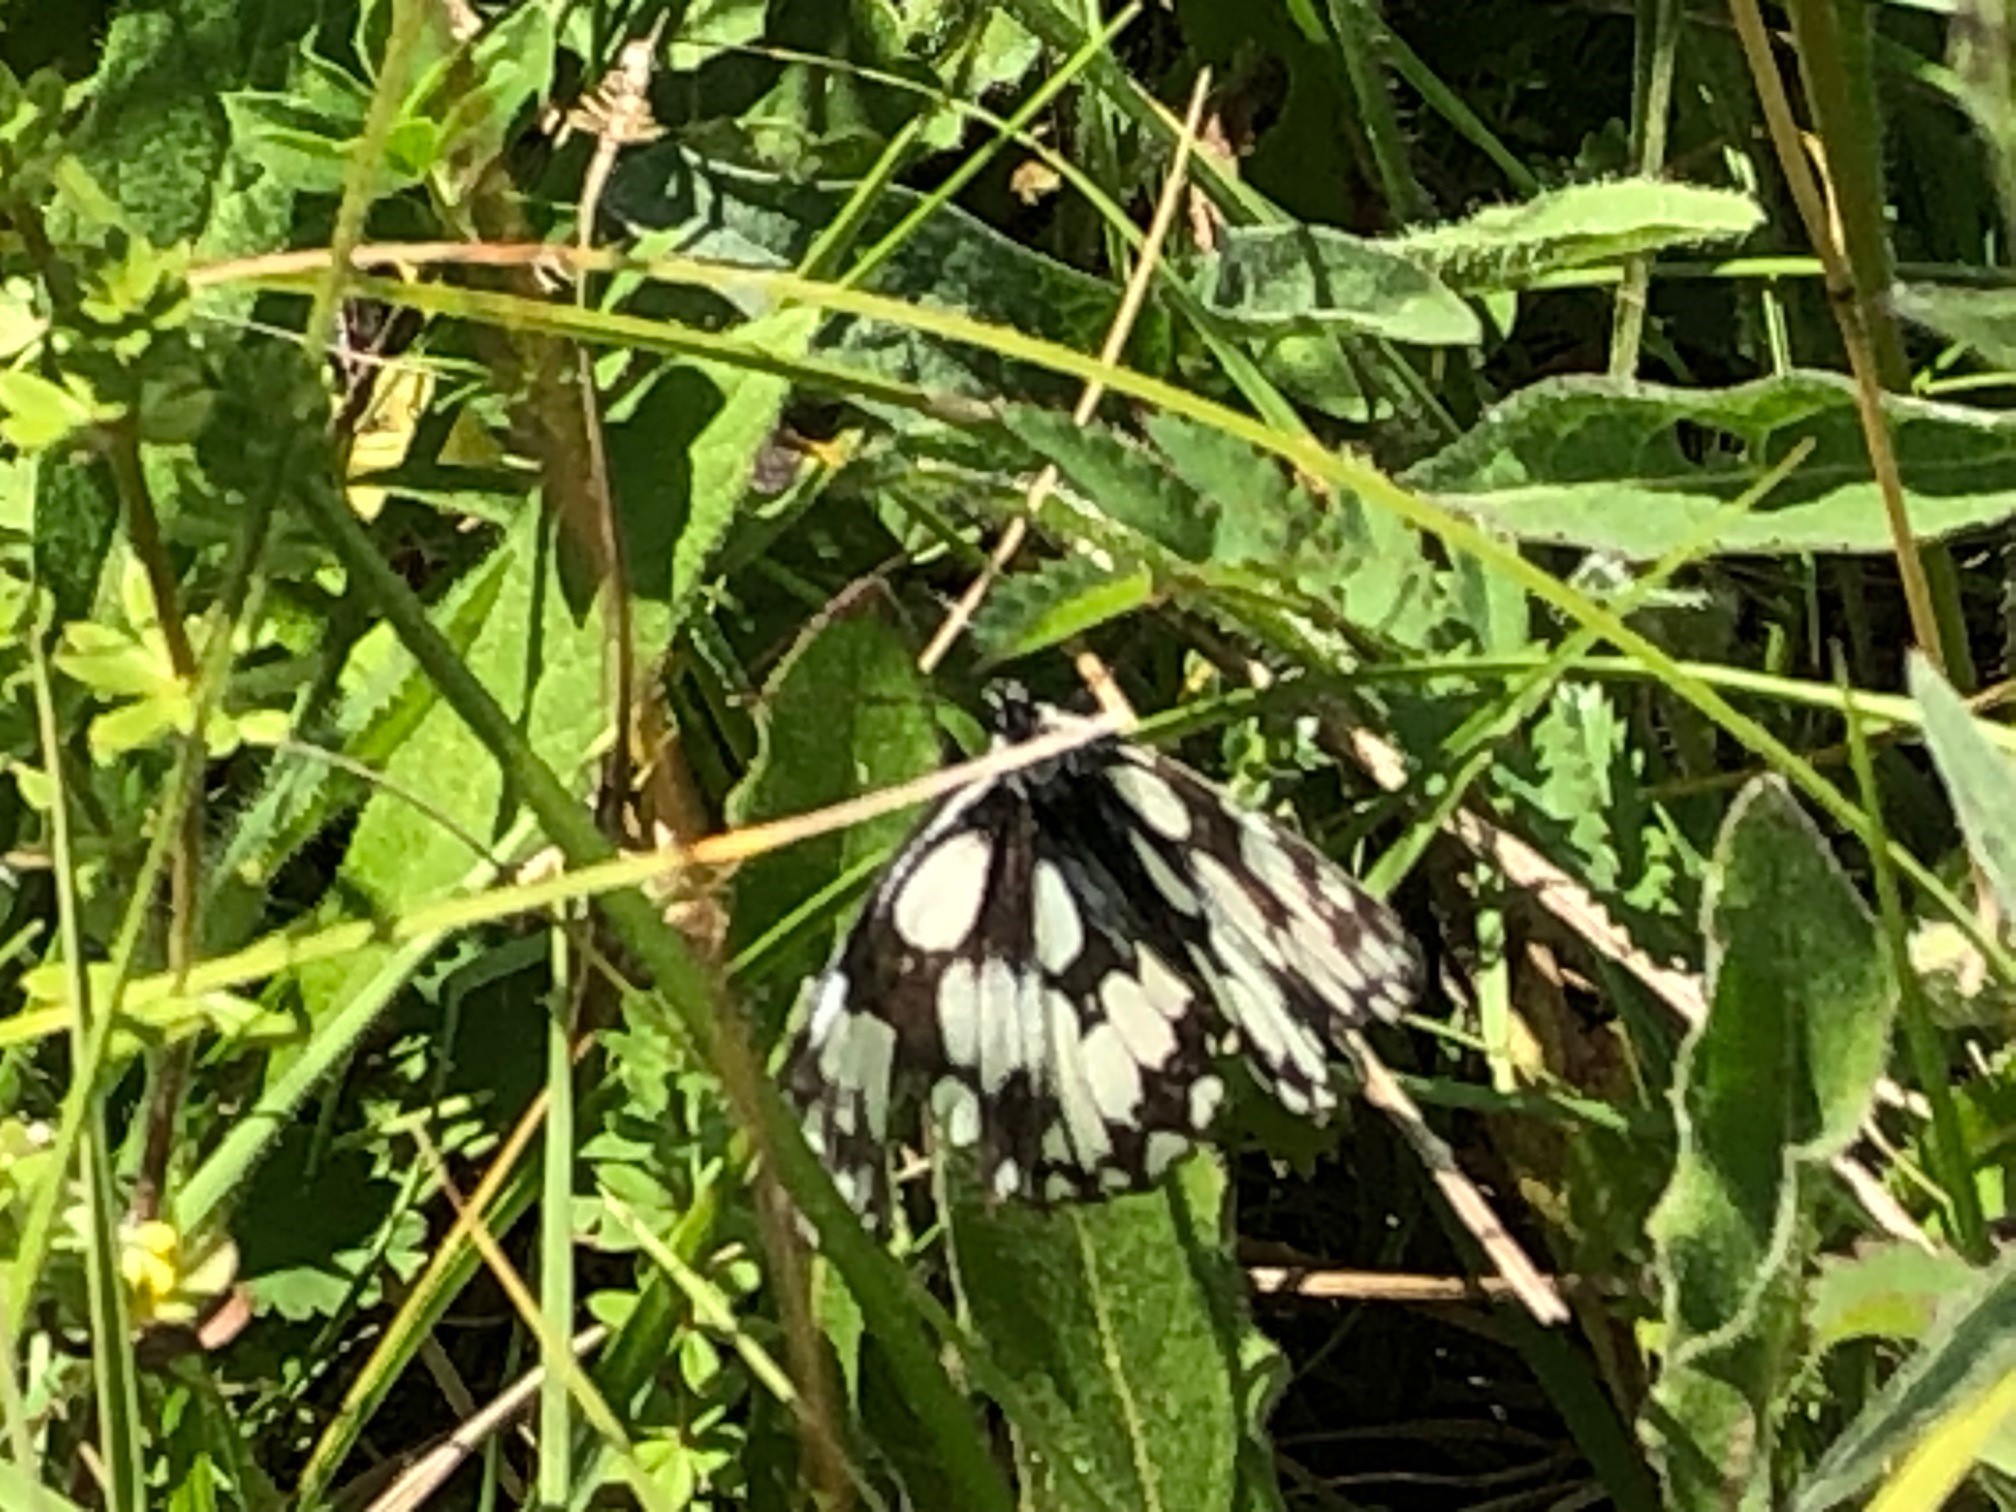 Black and white butterfly in grassland